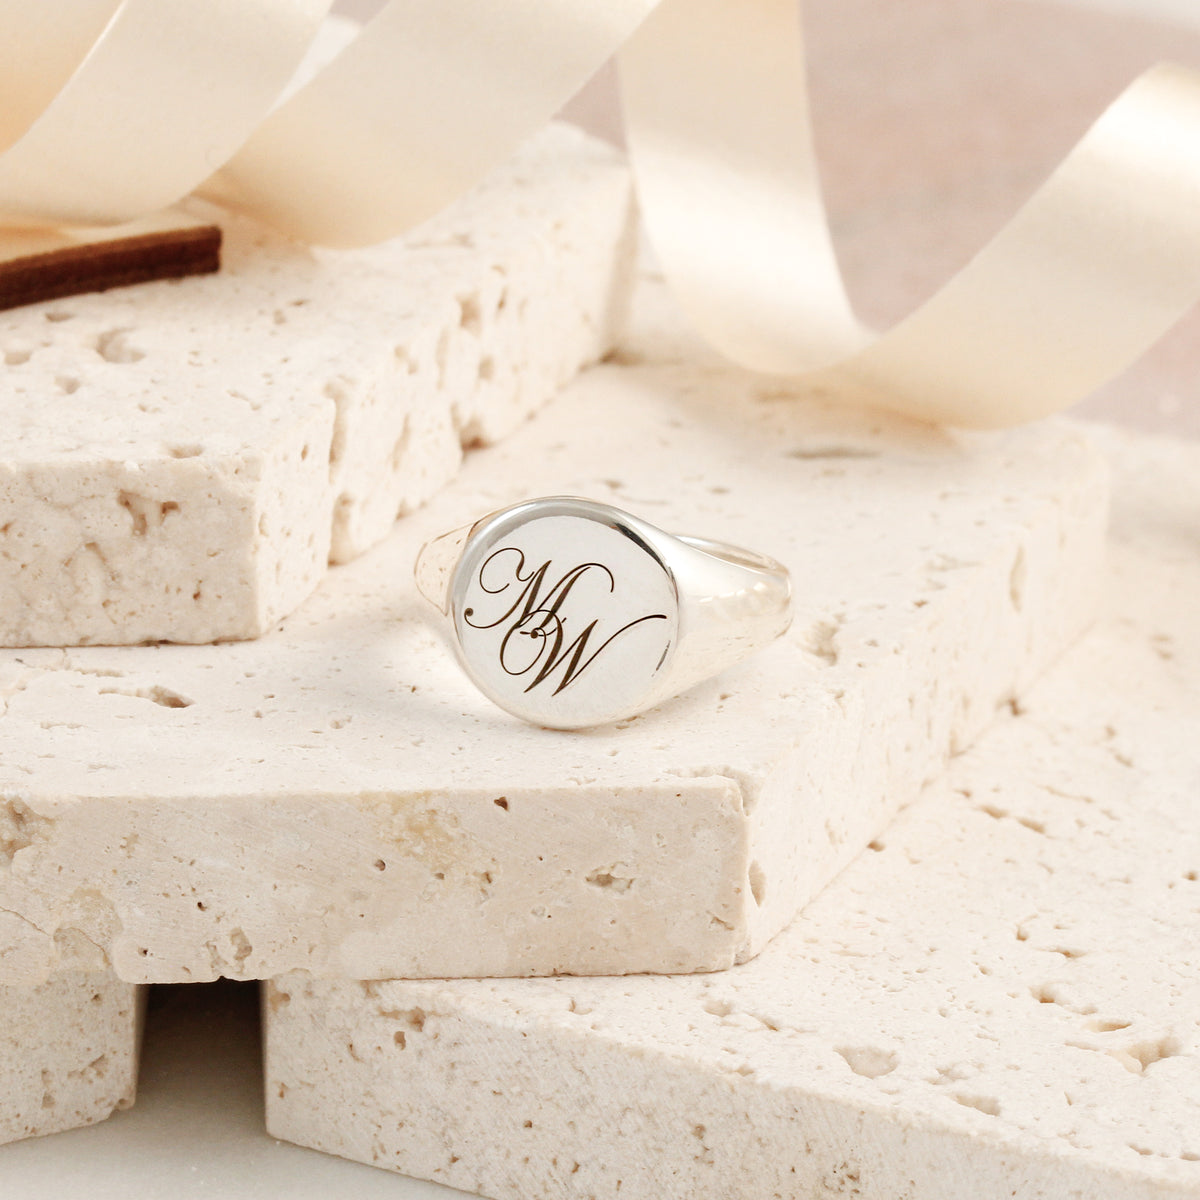 silver signet ring engraved with initials M and W